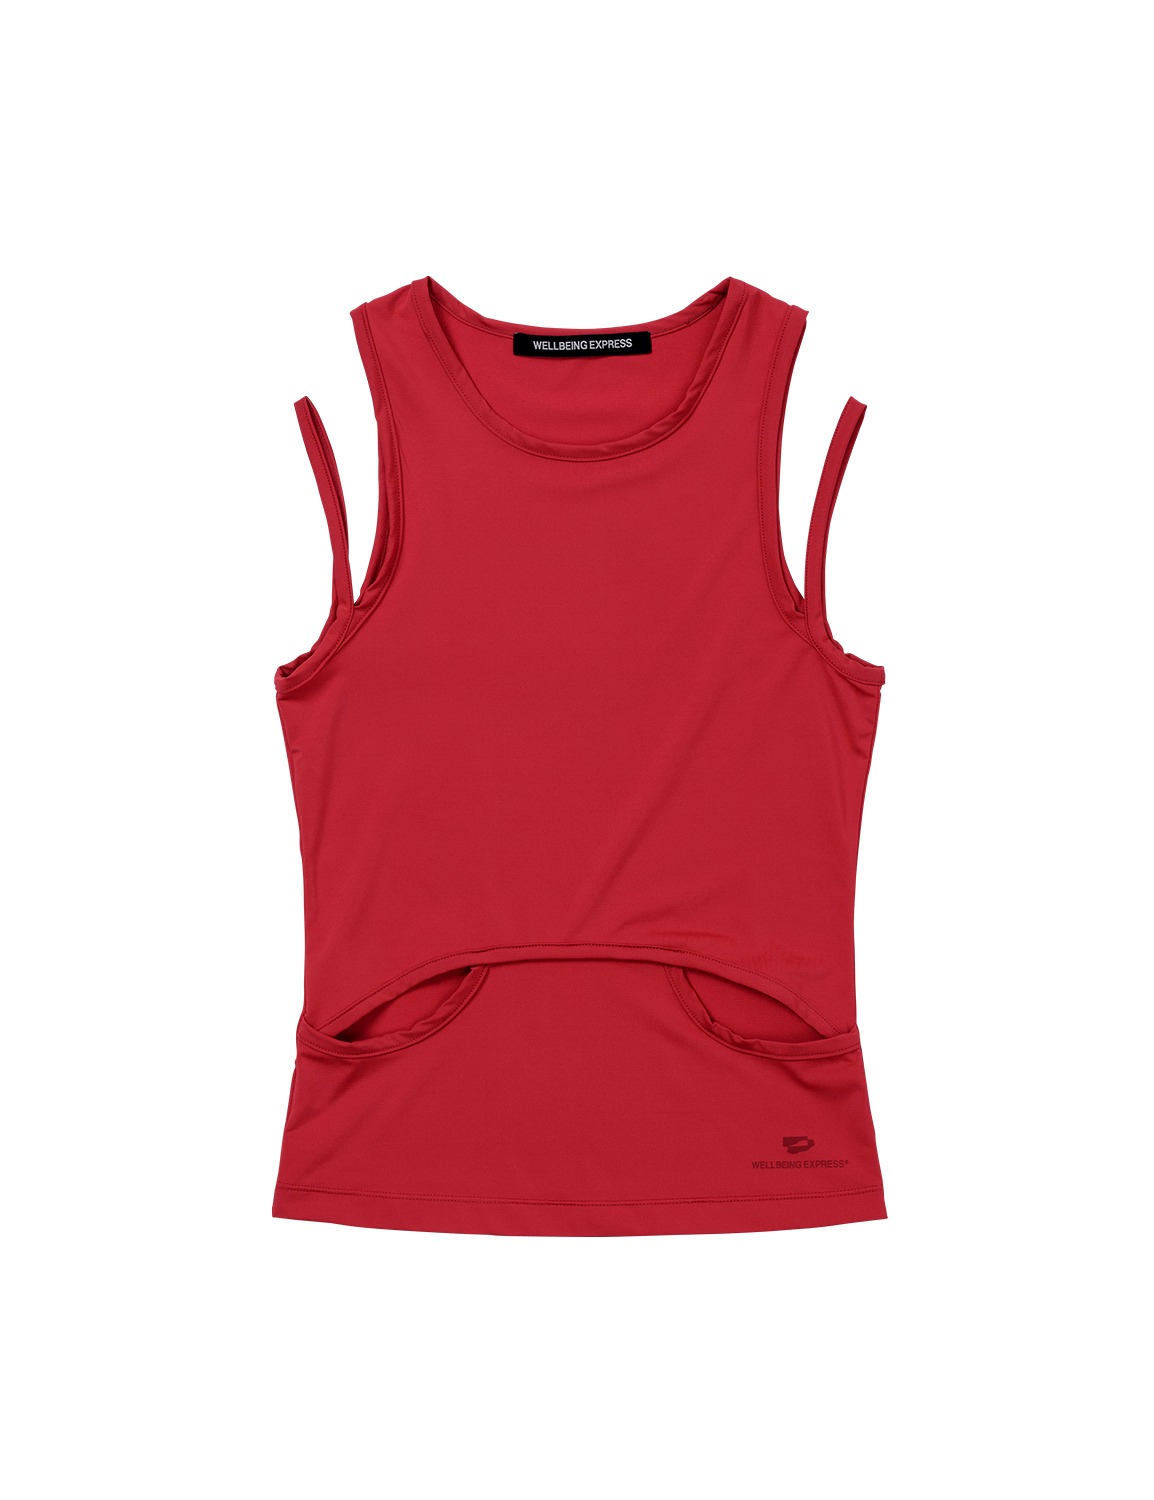 Cut-Out Sleeveless Red